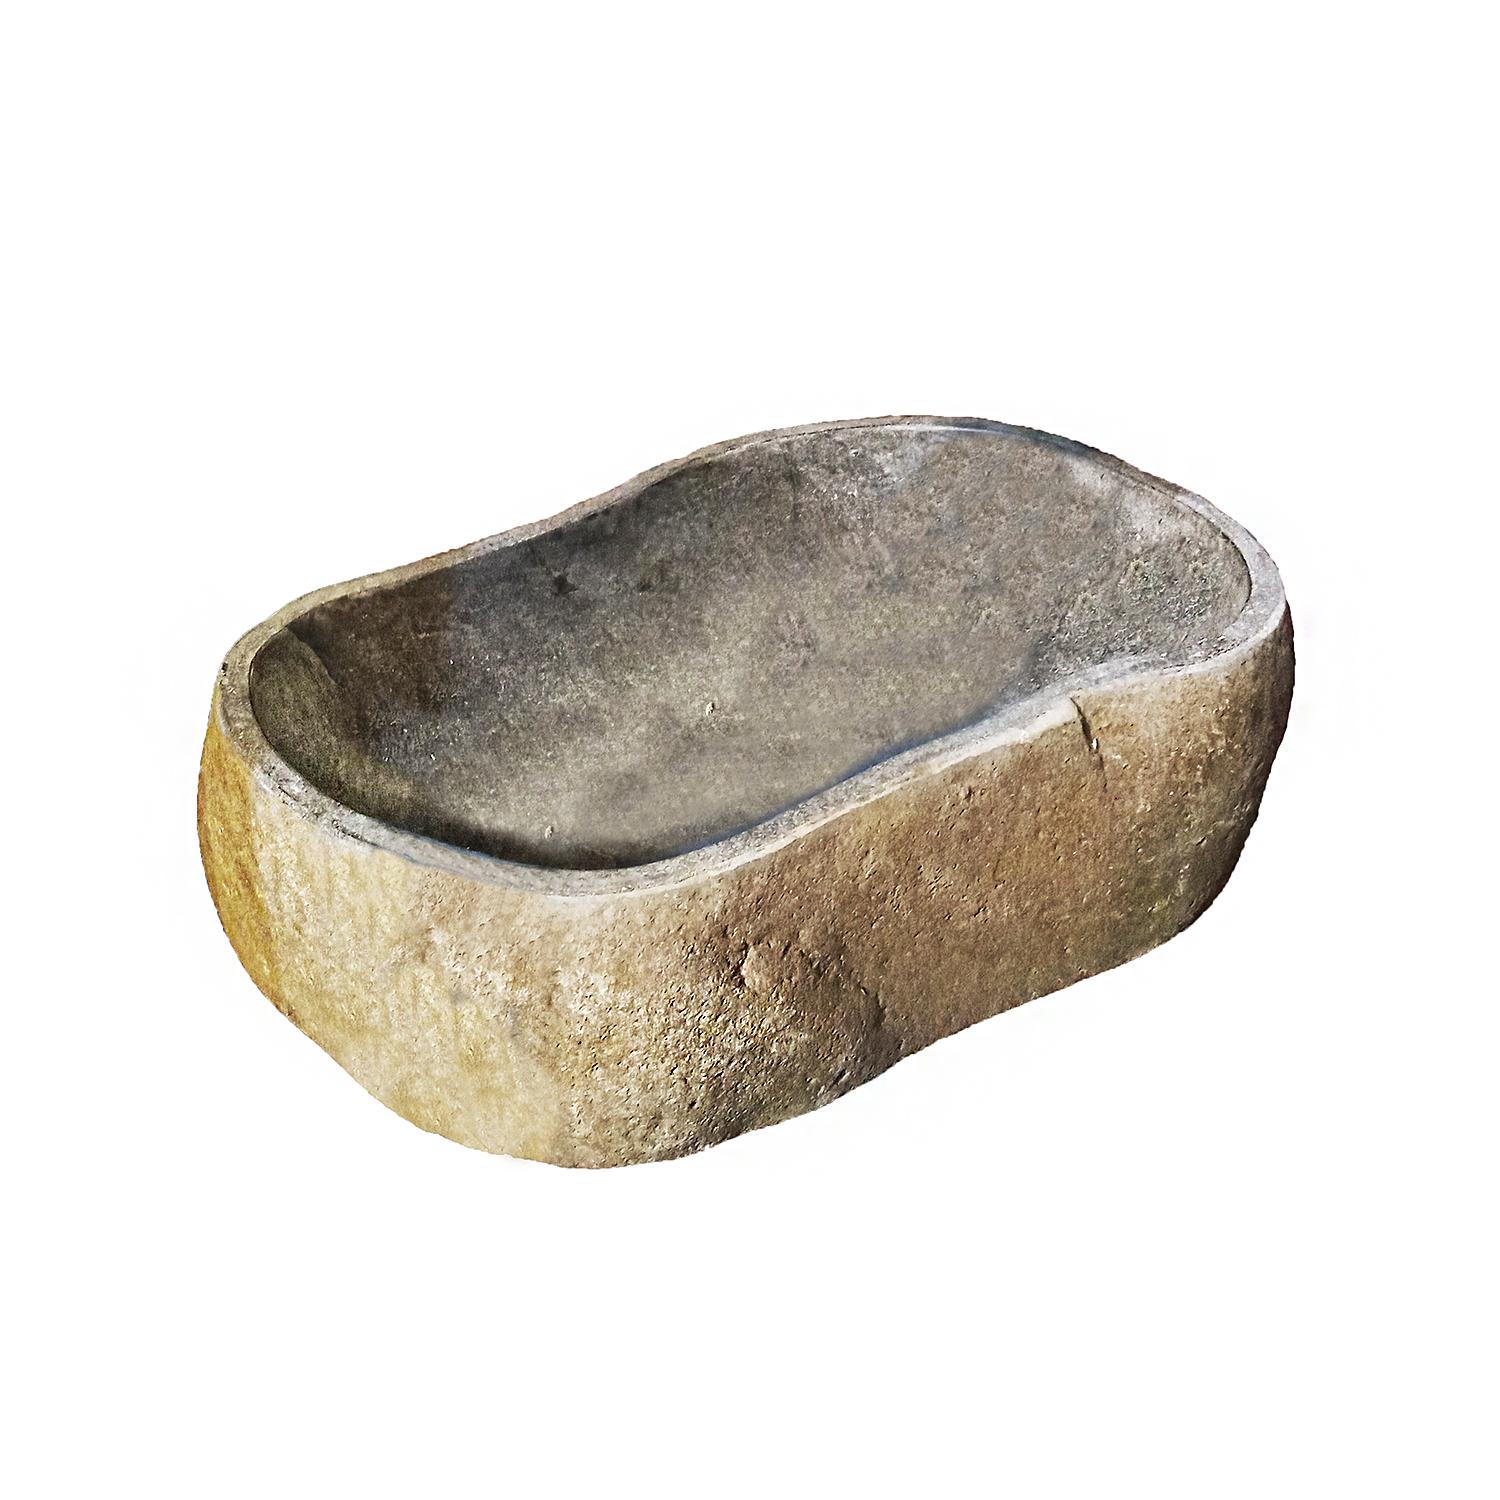 Stone Sink or Basin from Indonesia 1